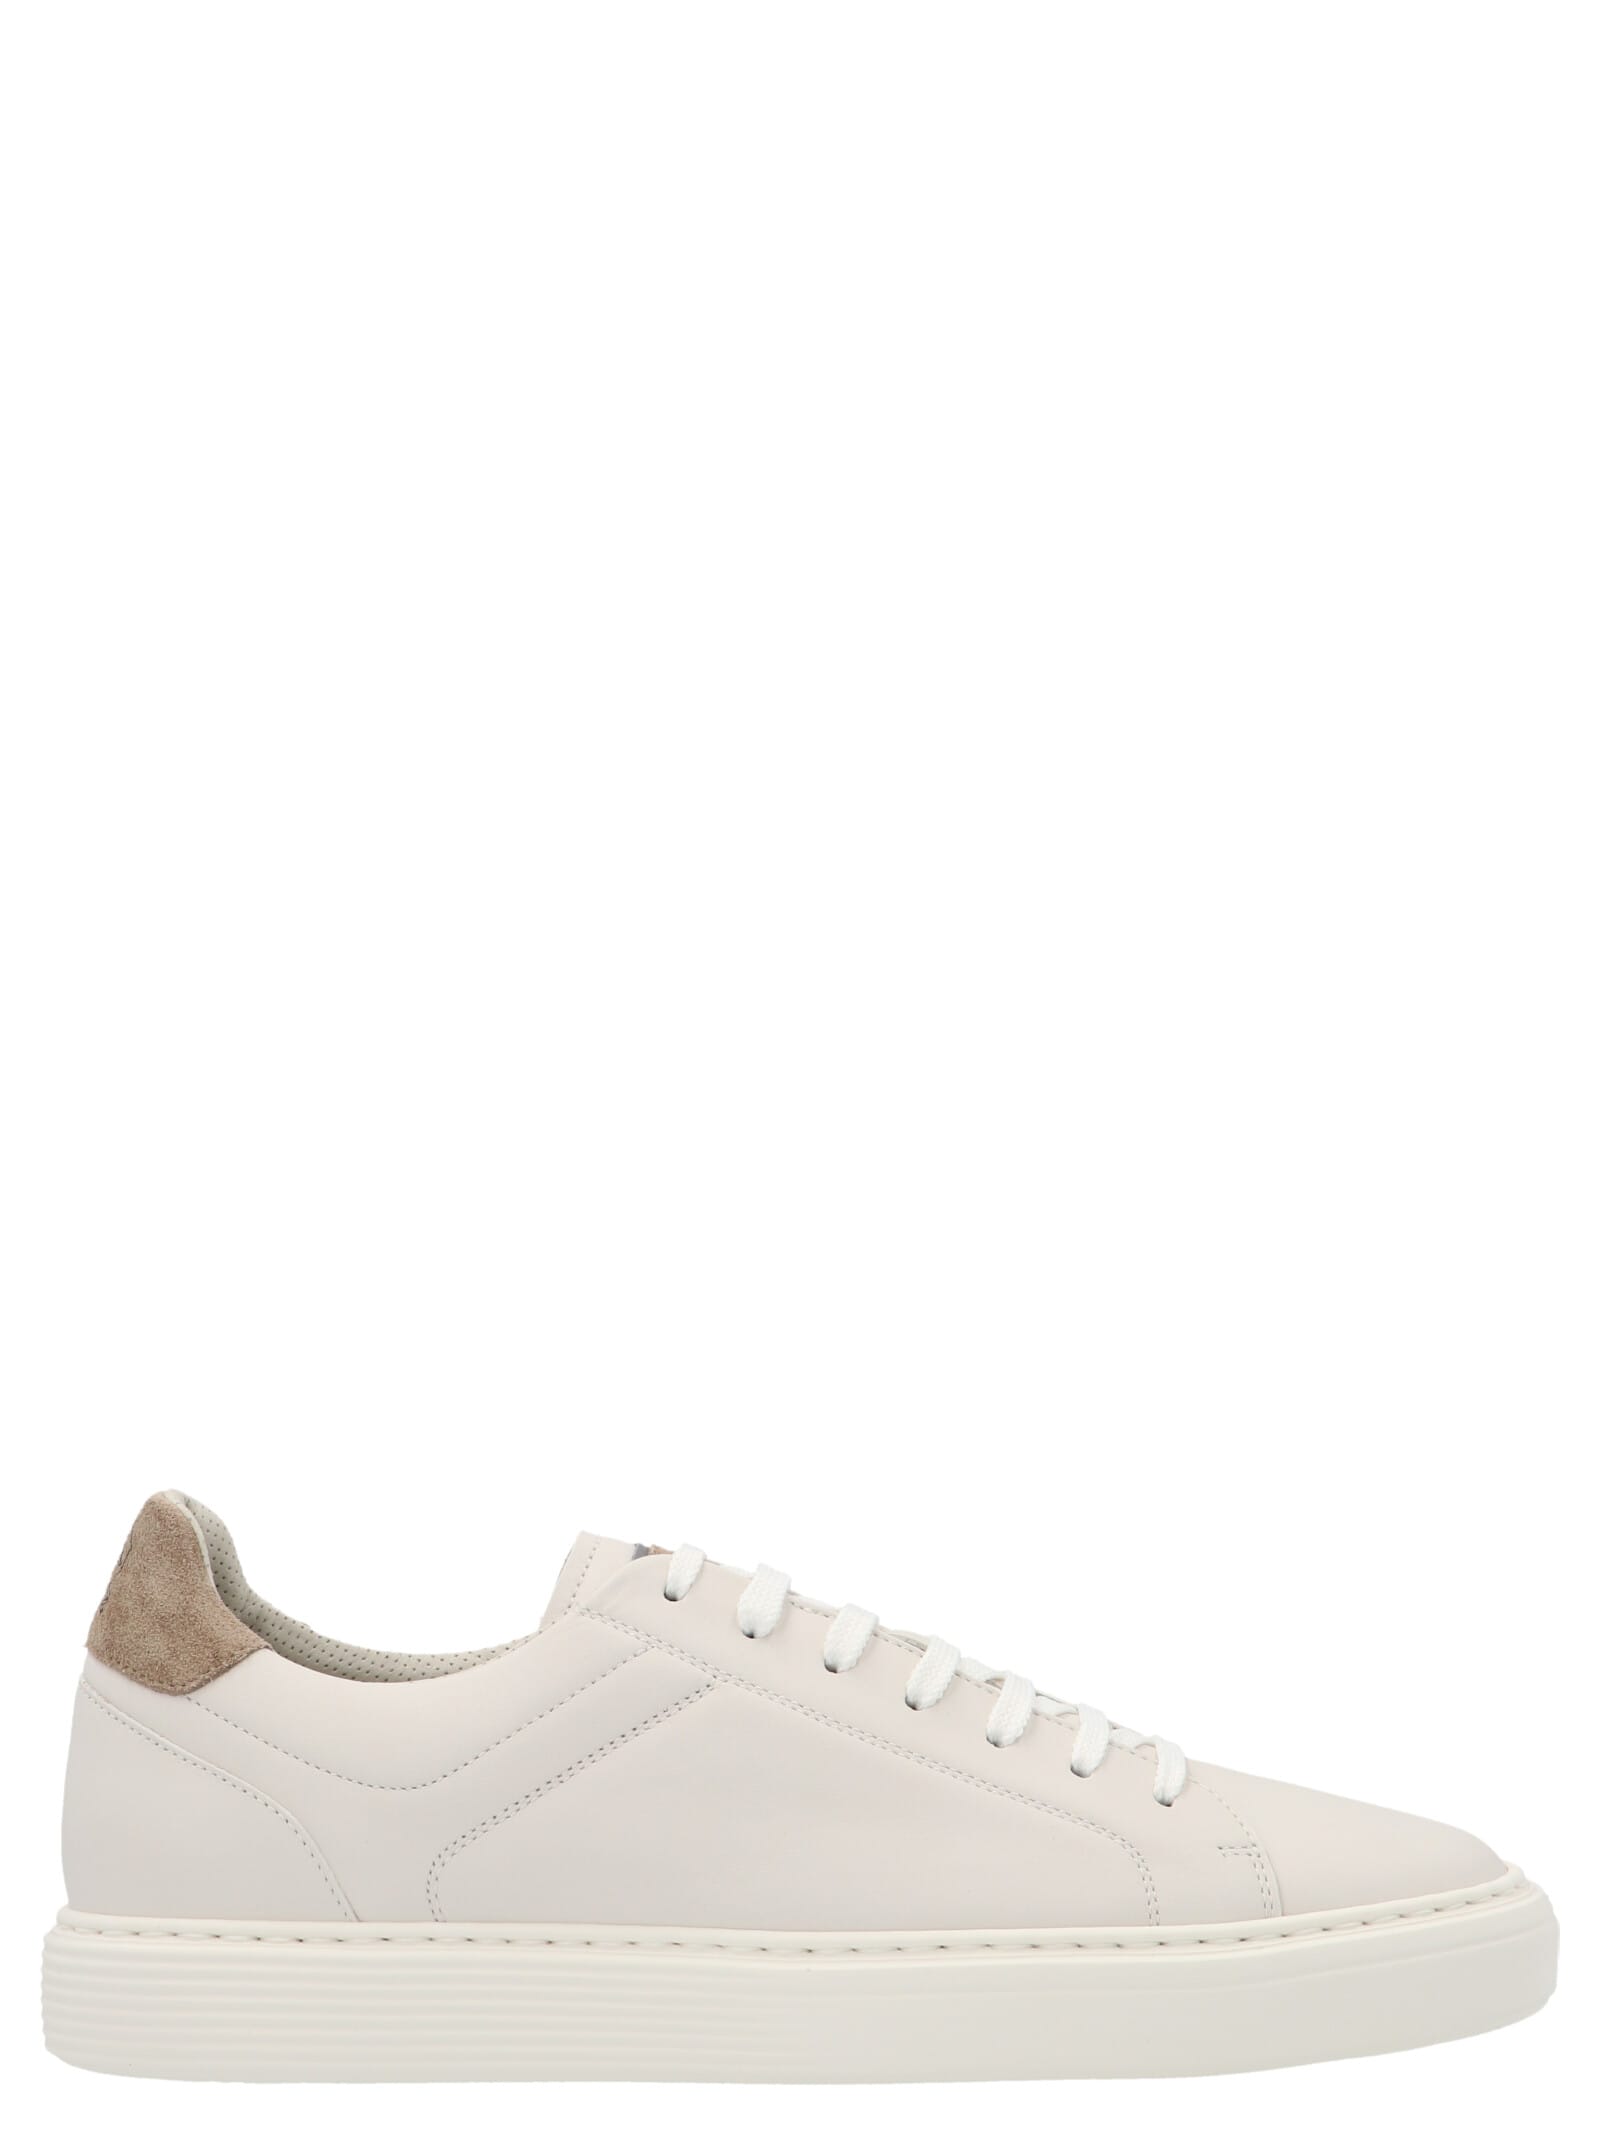 Brunello Cucinelli Low Leather Sneakers